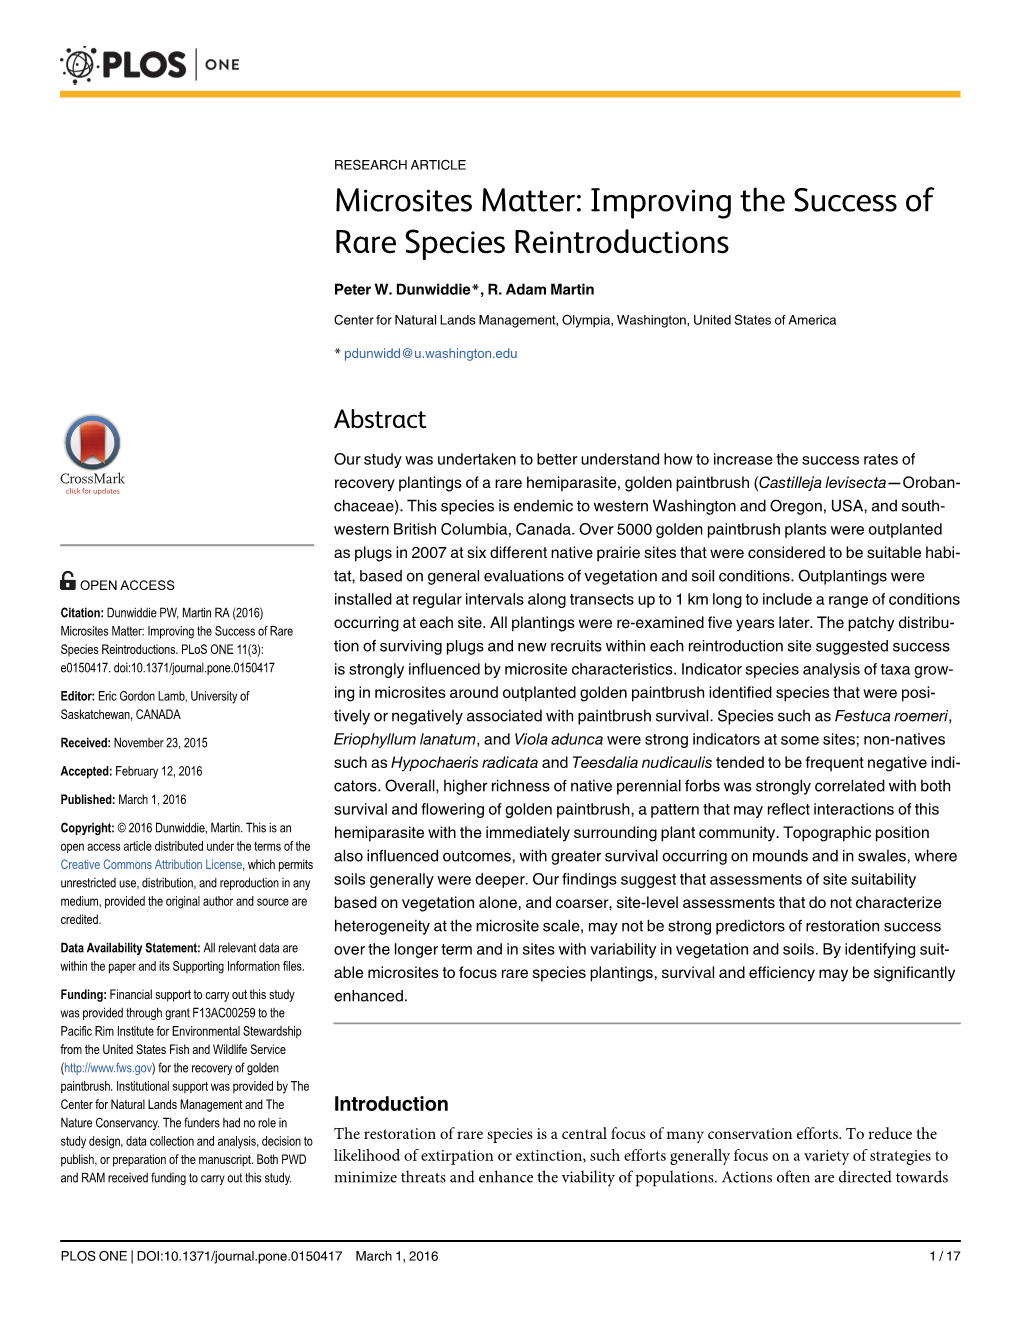 Microsites Matter: Improving the Success of Rare Species Reintroductions